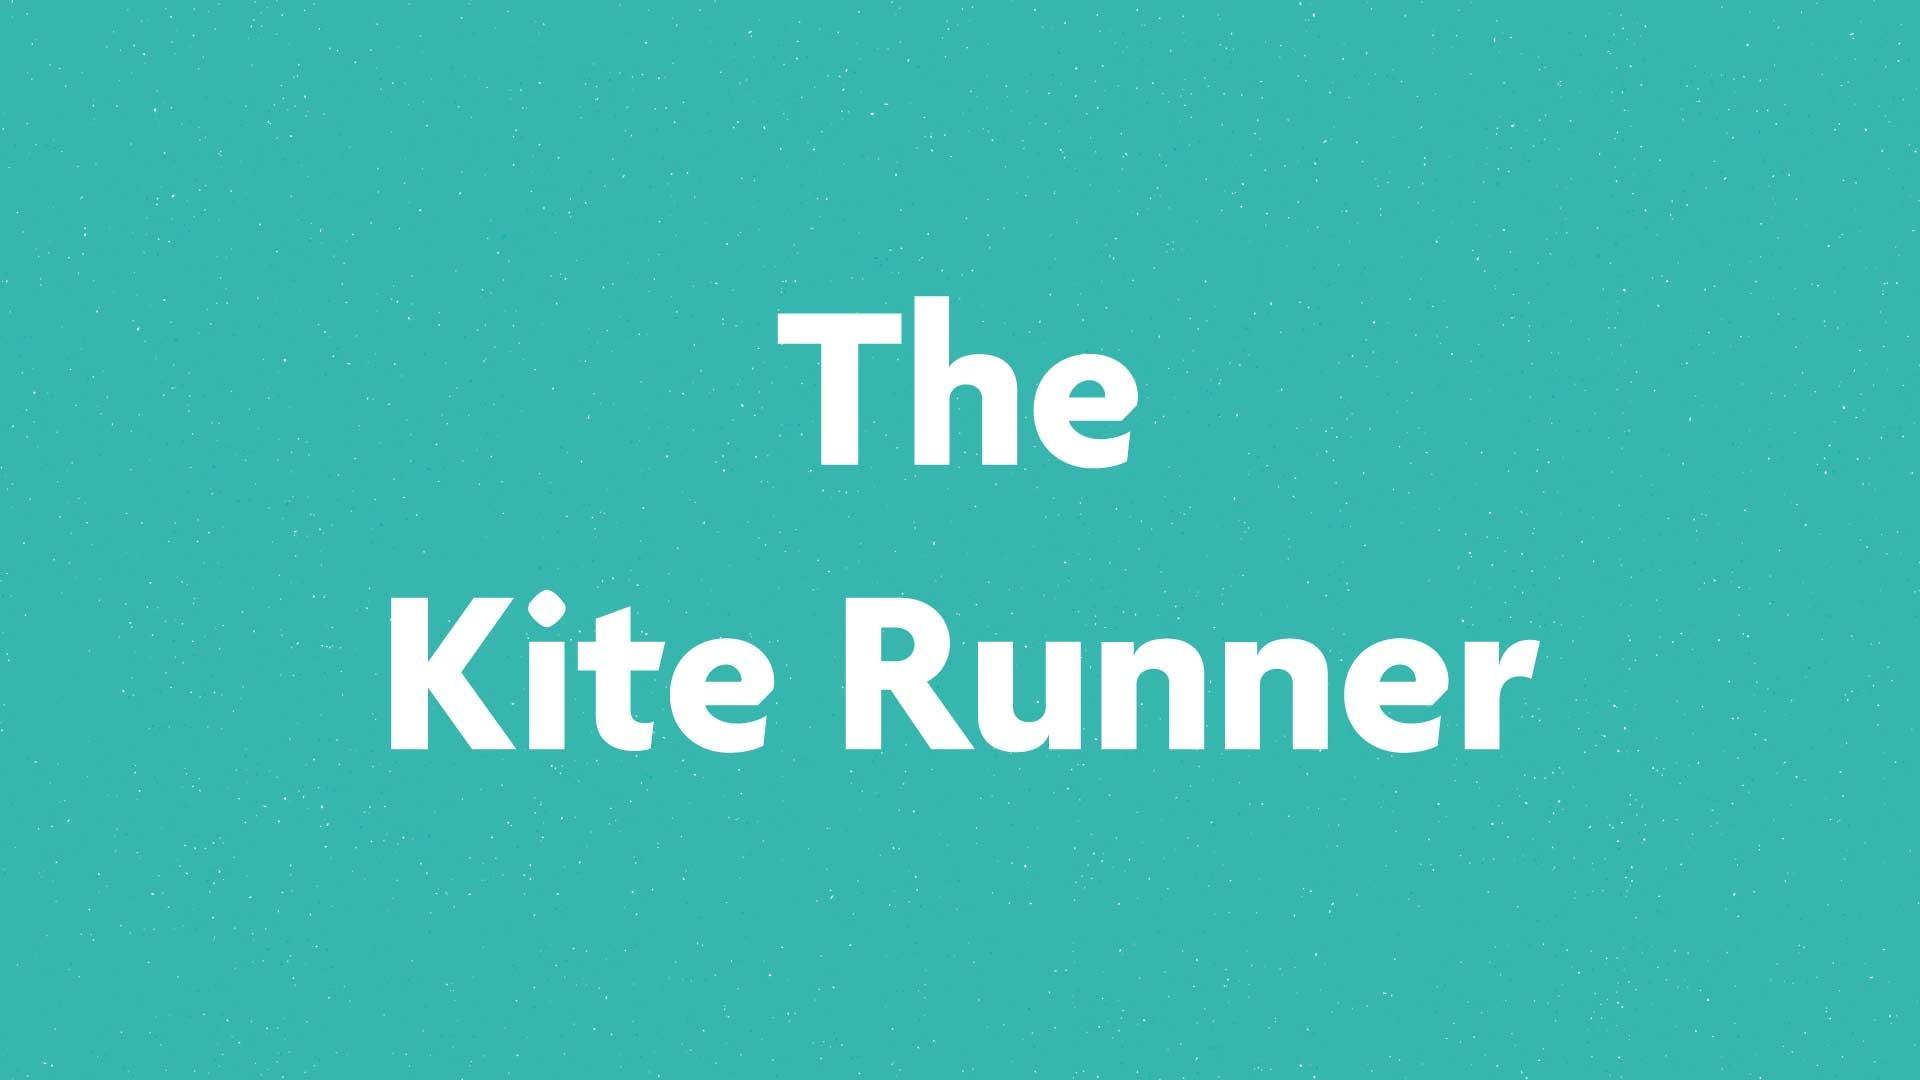 The Kite Runner book submission card on a green background.